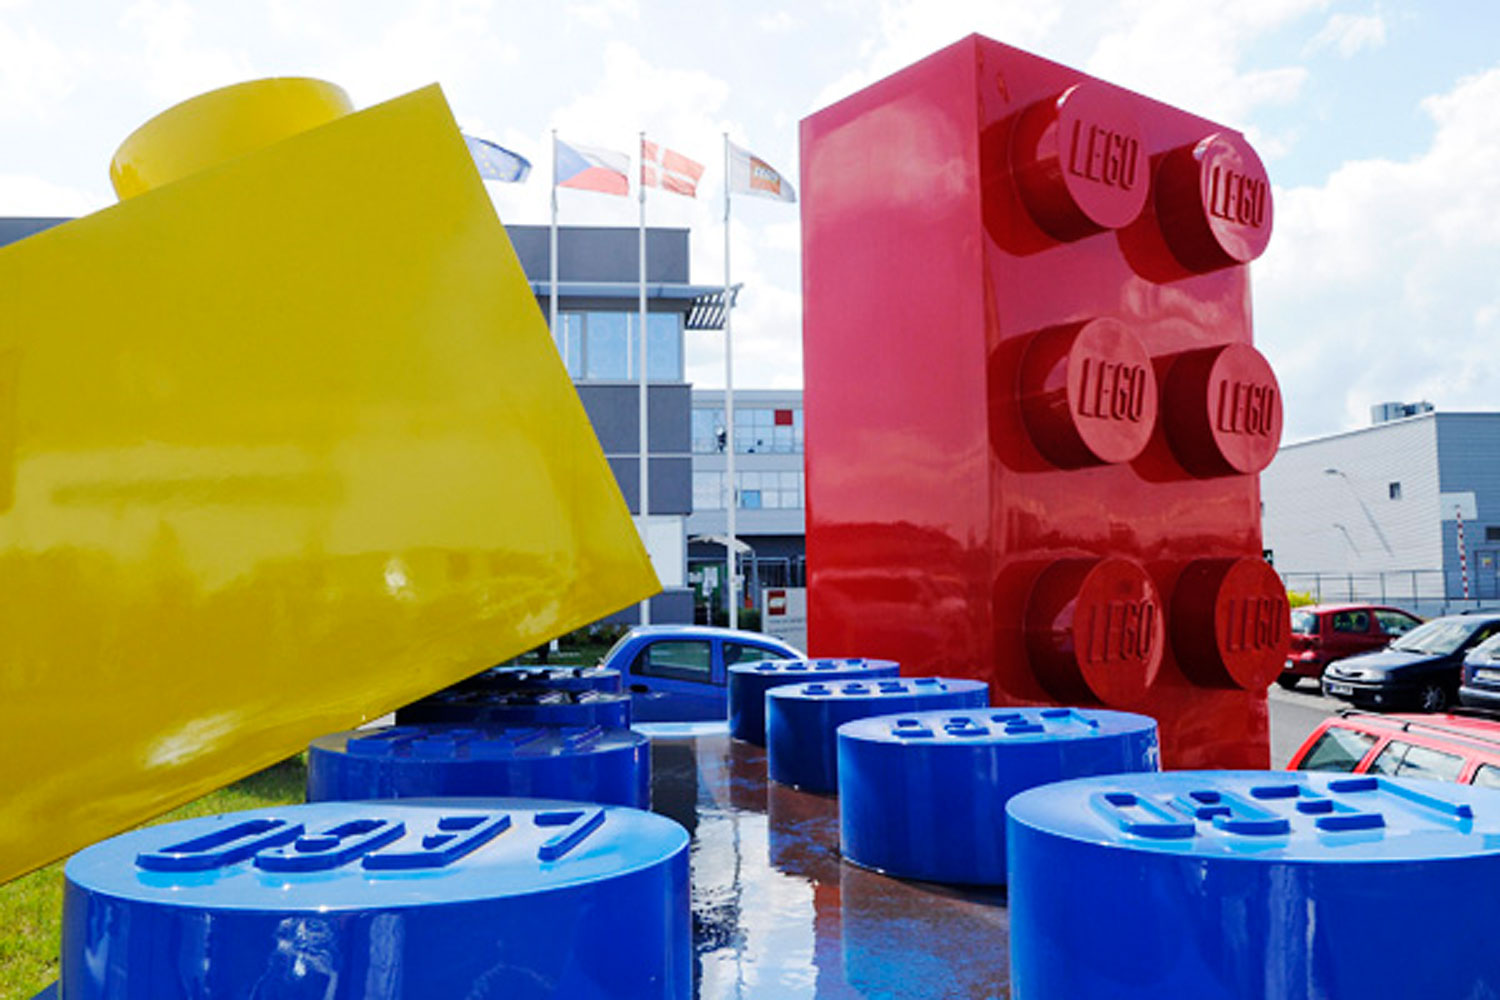 Giant Lego bricks stand on display outside the Lego A/S assembly plant in Kladno, Czech Republic